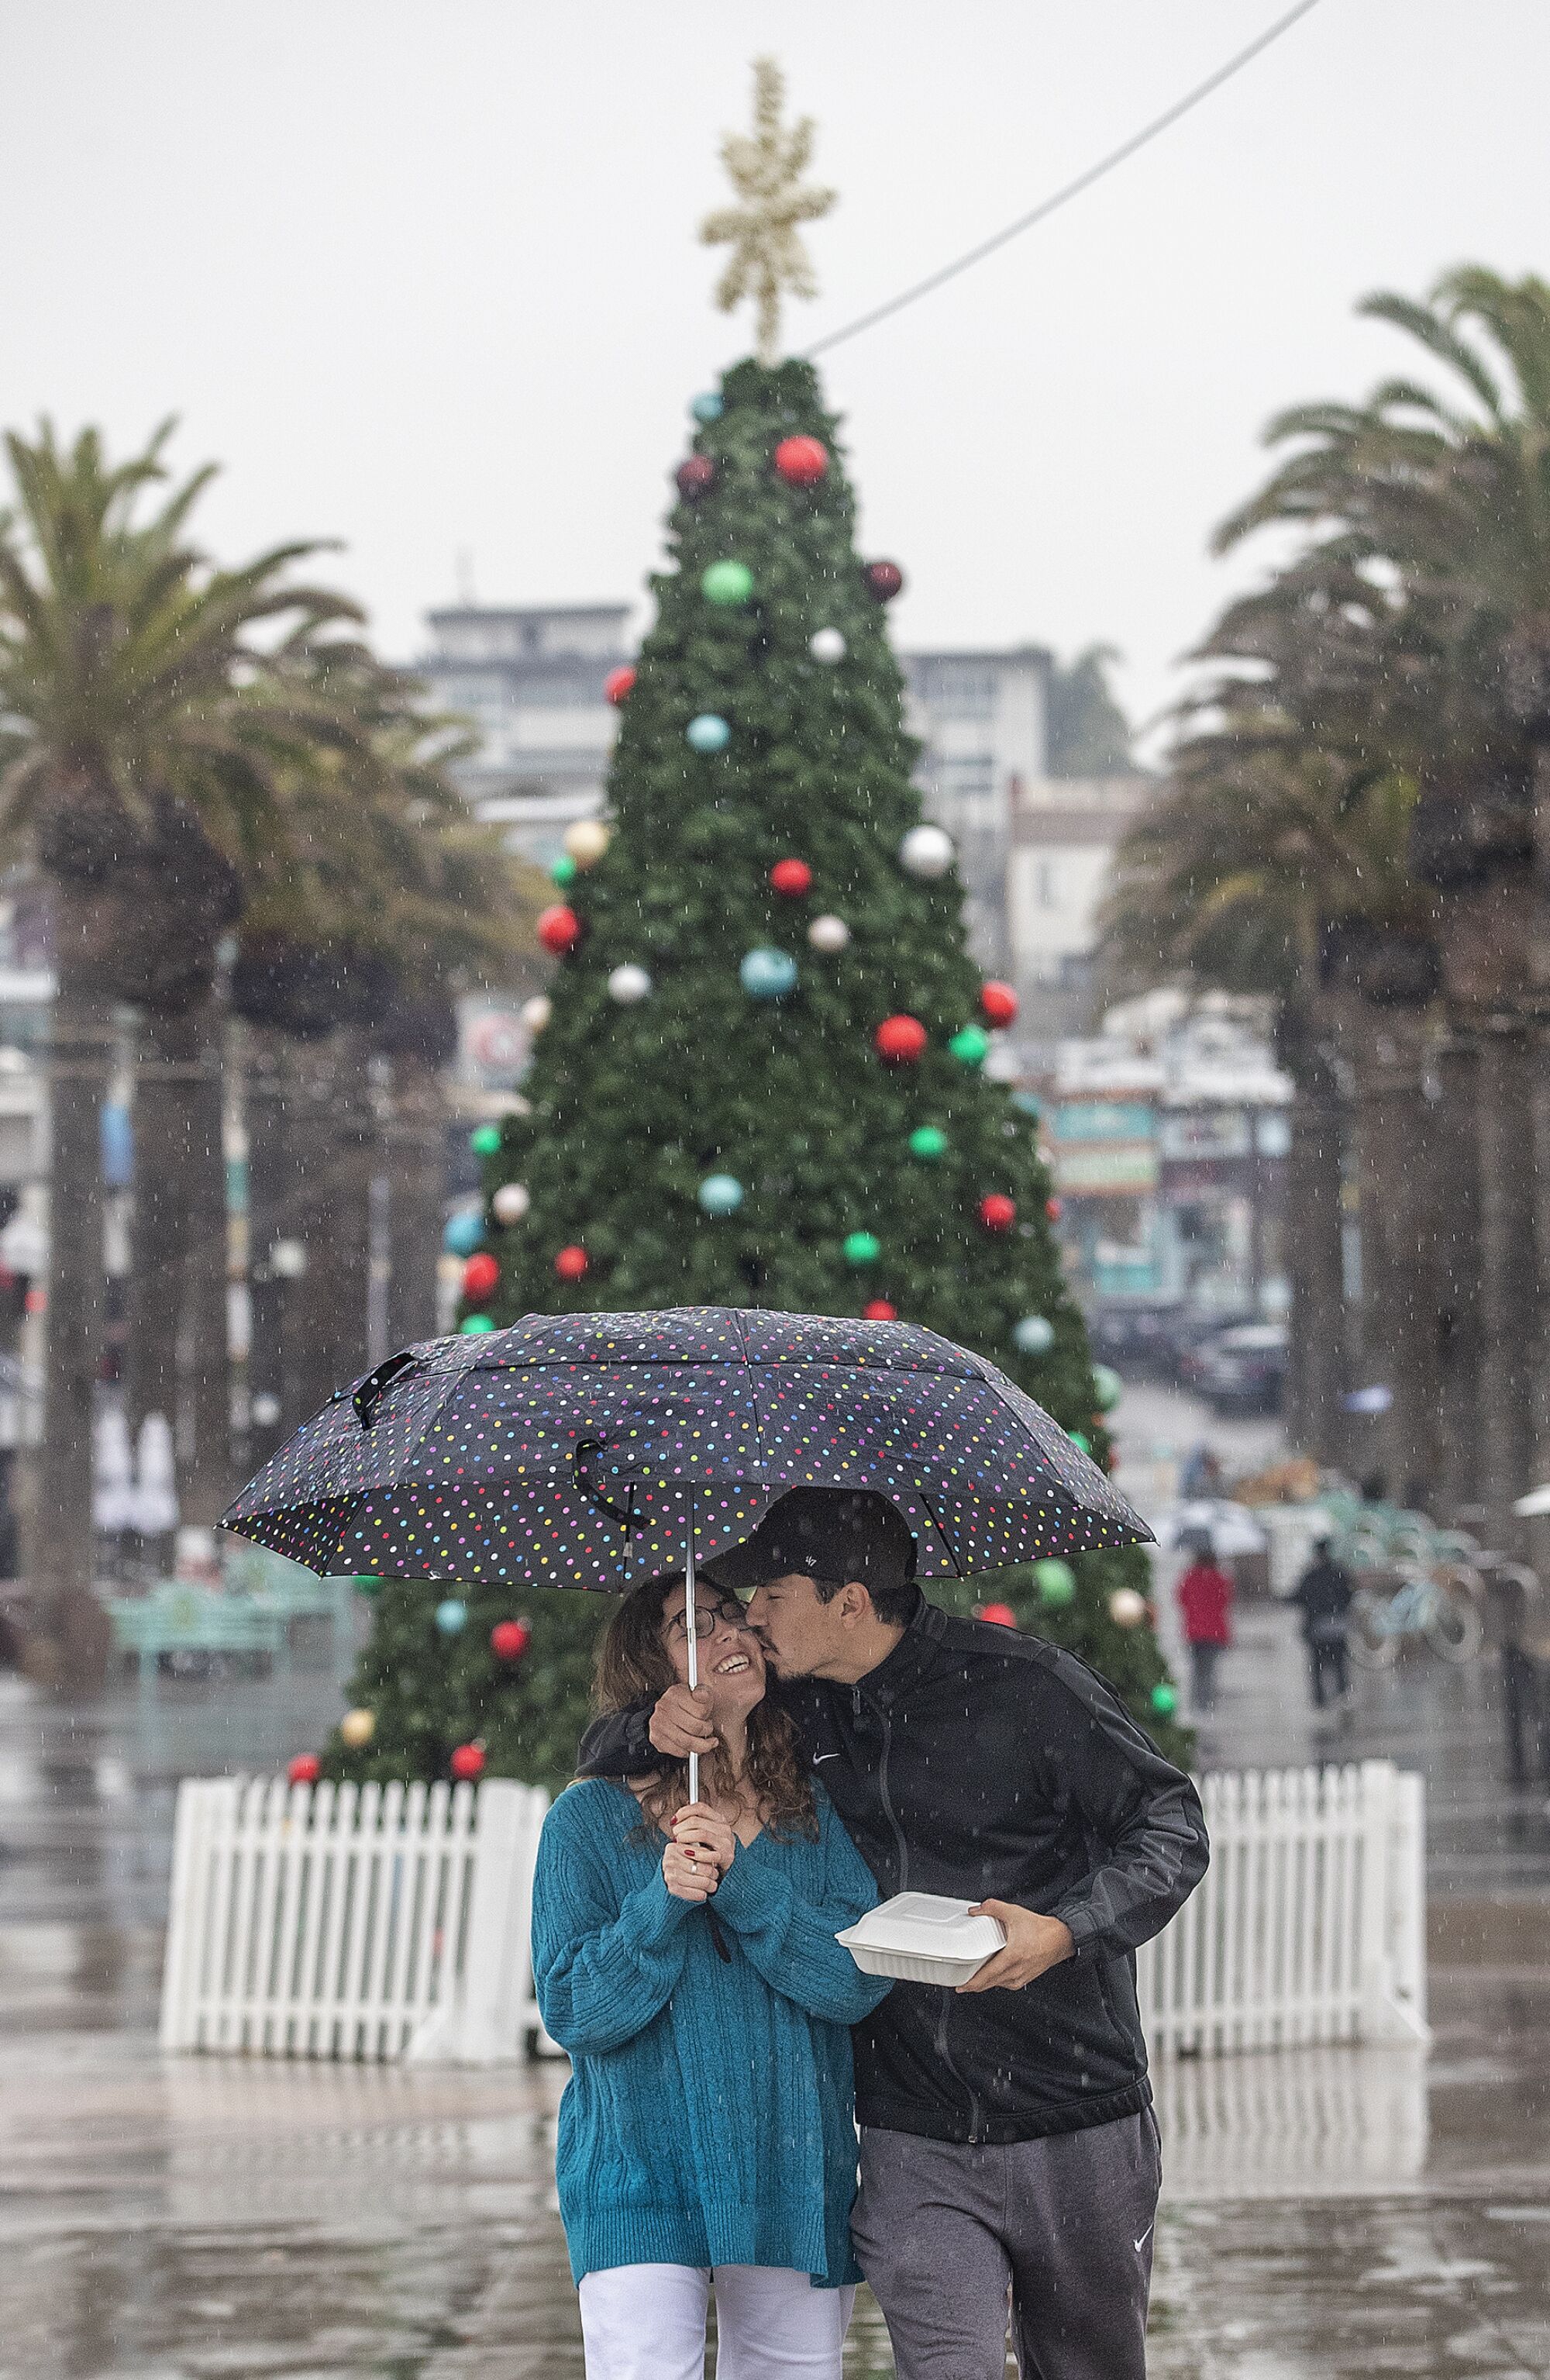 A couple share an umbrella in front of an outdoor Christmas tree